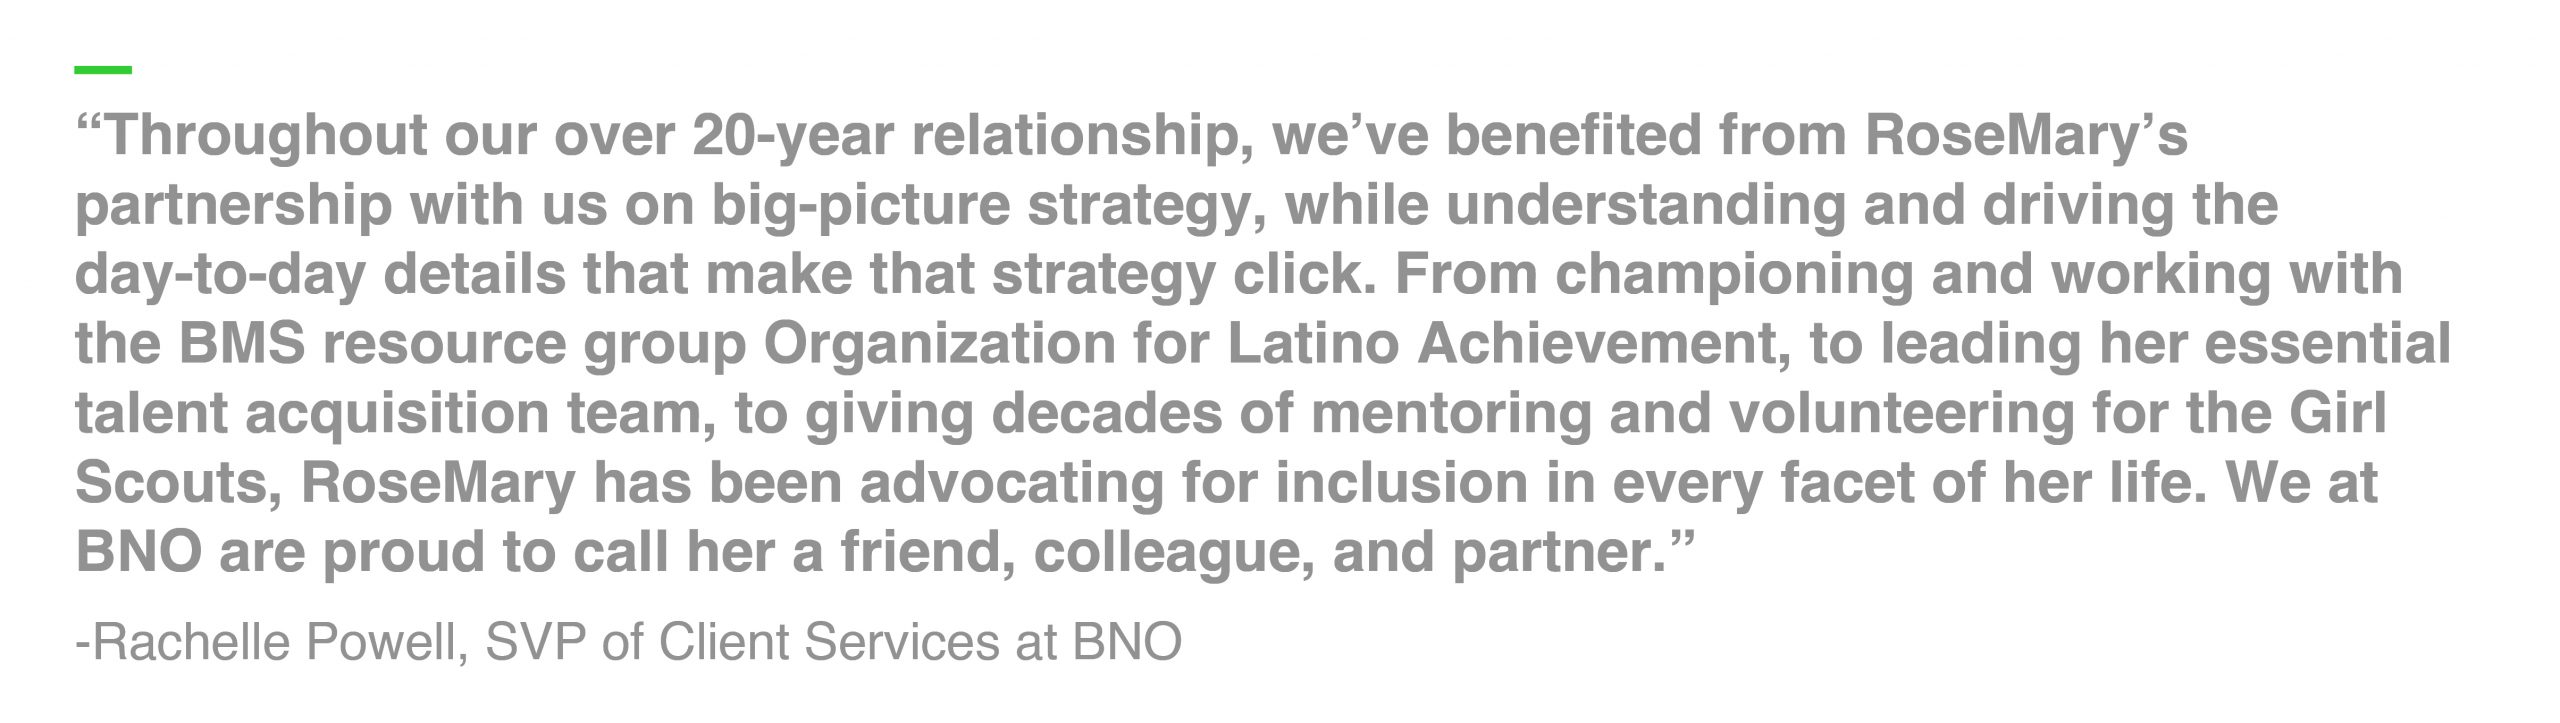 “Throughout our over 20-year relationship, we’ve benefited from RoseMary’s partnership with us on big-picture strategy, while understanding and driving the day-to-day details that make that strategy click. From championing and working with the BMS resource group Organization for Latino Achievement, to leading her essential talent acquisition team, to giving decades of mentoring and volunteering for the Girl Scouts, RoseMary has been advocating for inclusion in every facet of her life. We at BNO are proud to call her a friend, colleague, and partner.” -Rachelle Powell, SVP of Client Services at BNO